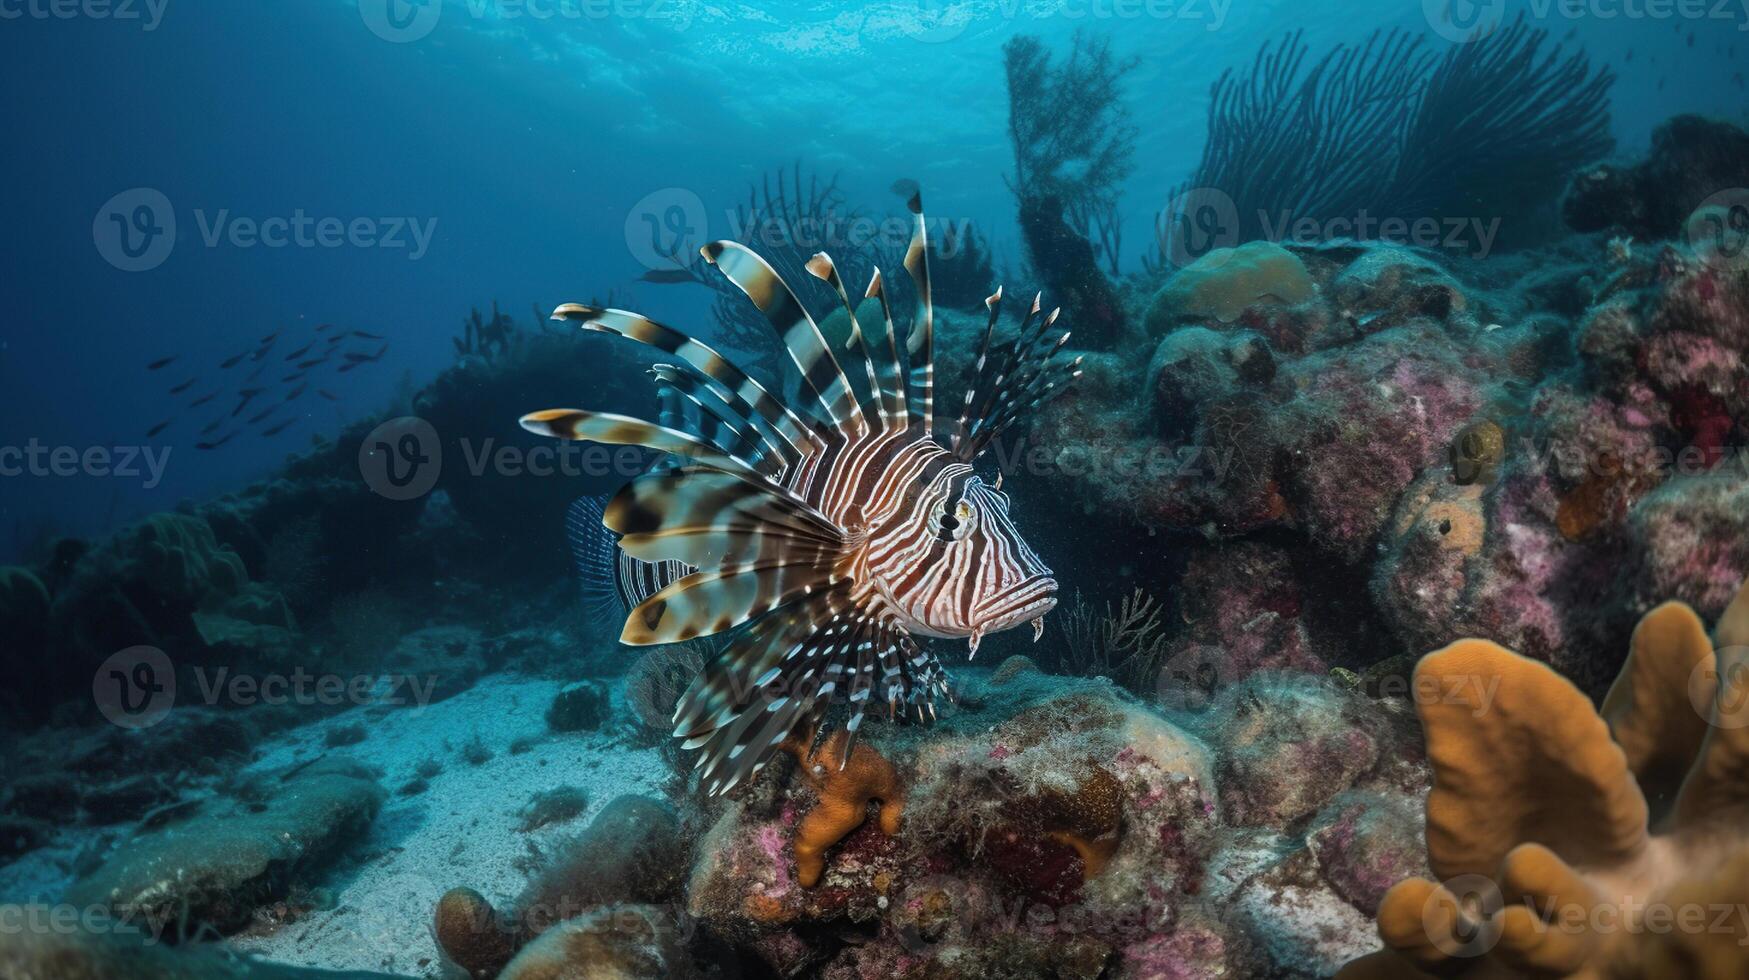 Scuba diving. Divers see a fabulous array of corals and fish, some even spot a seahorse and see how stingrays hover above the seabed, photo